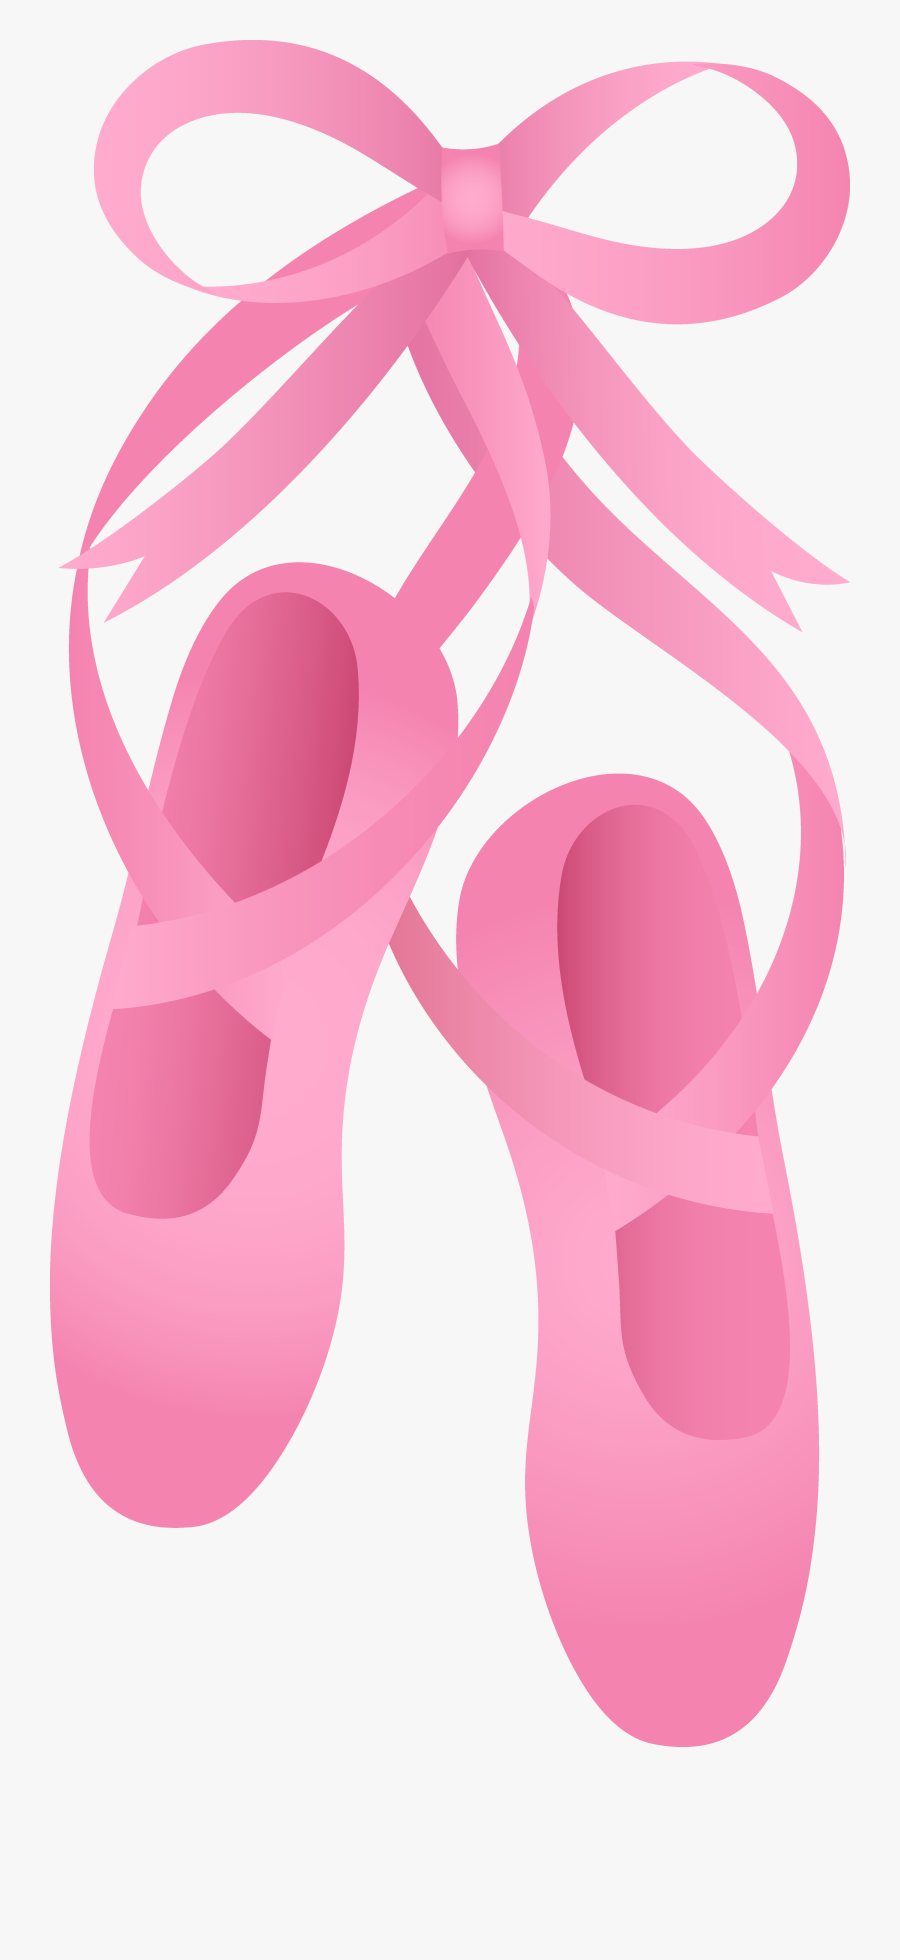 Ballerina Shoes Clipart - Ballet Slippers Clipart , Free Transparent ...